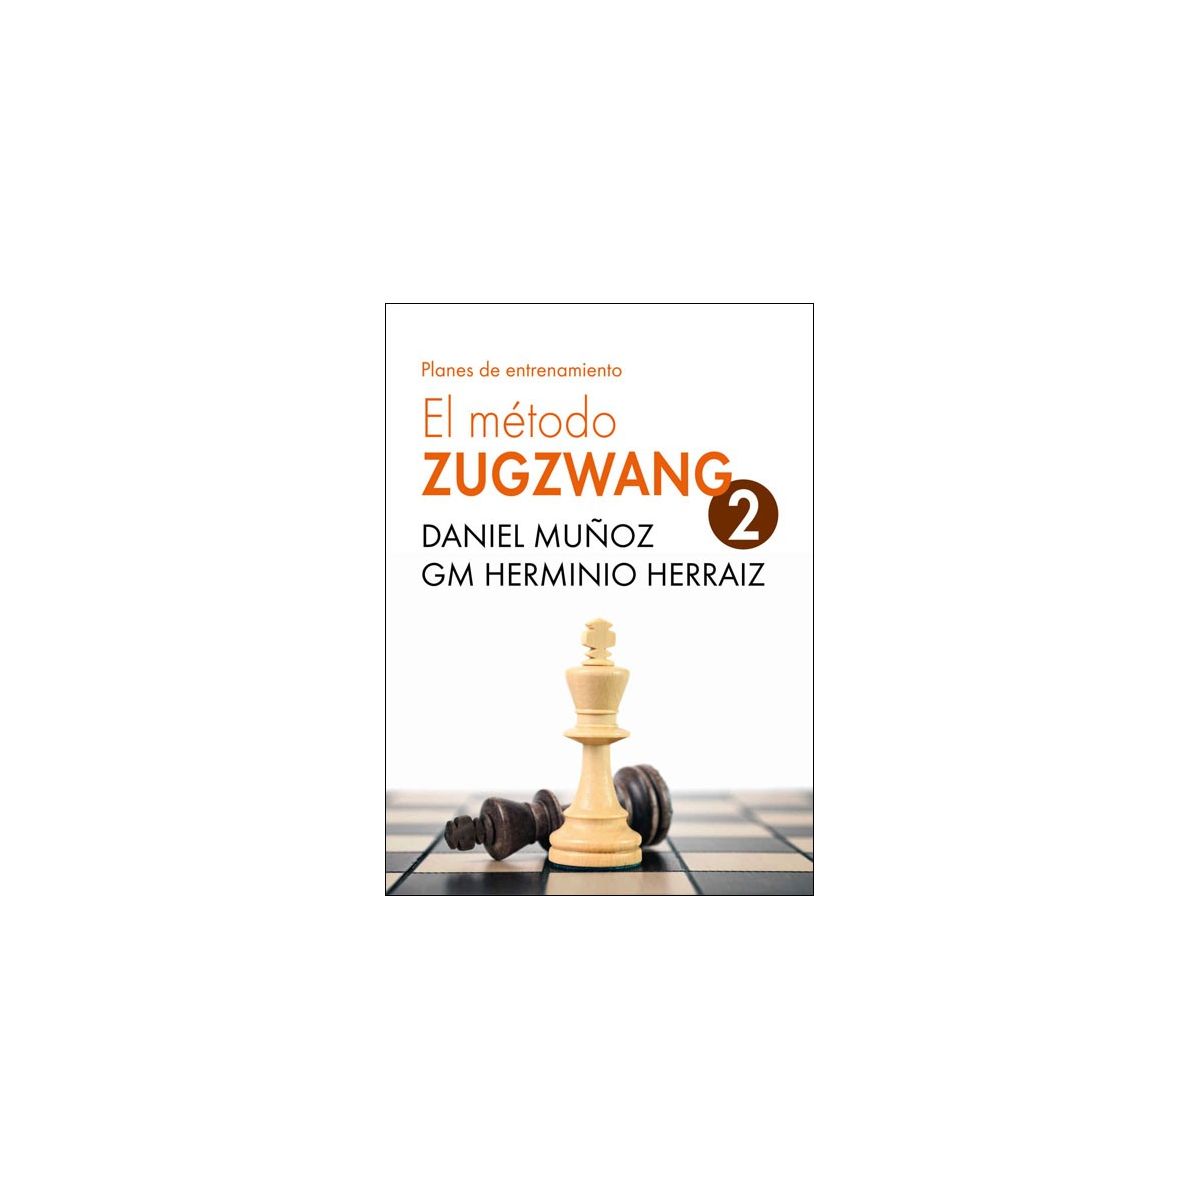 Qué significa “Zugzwang”?